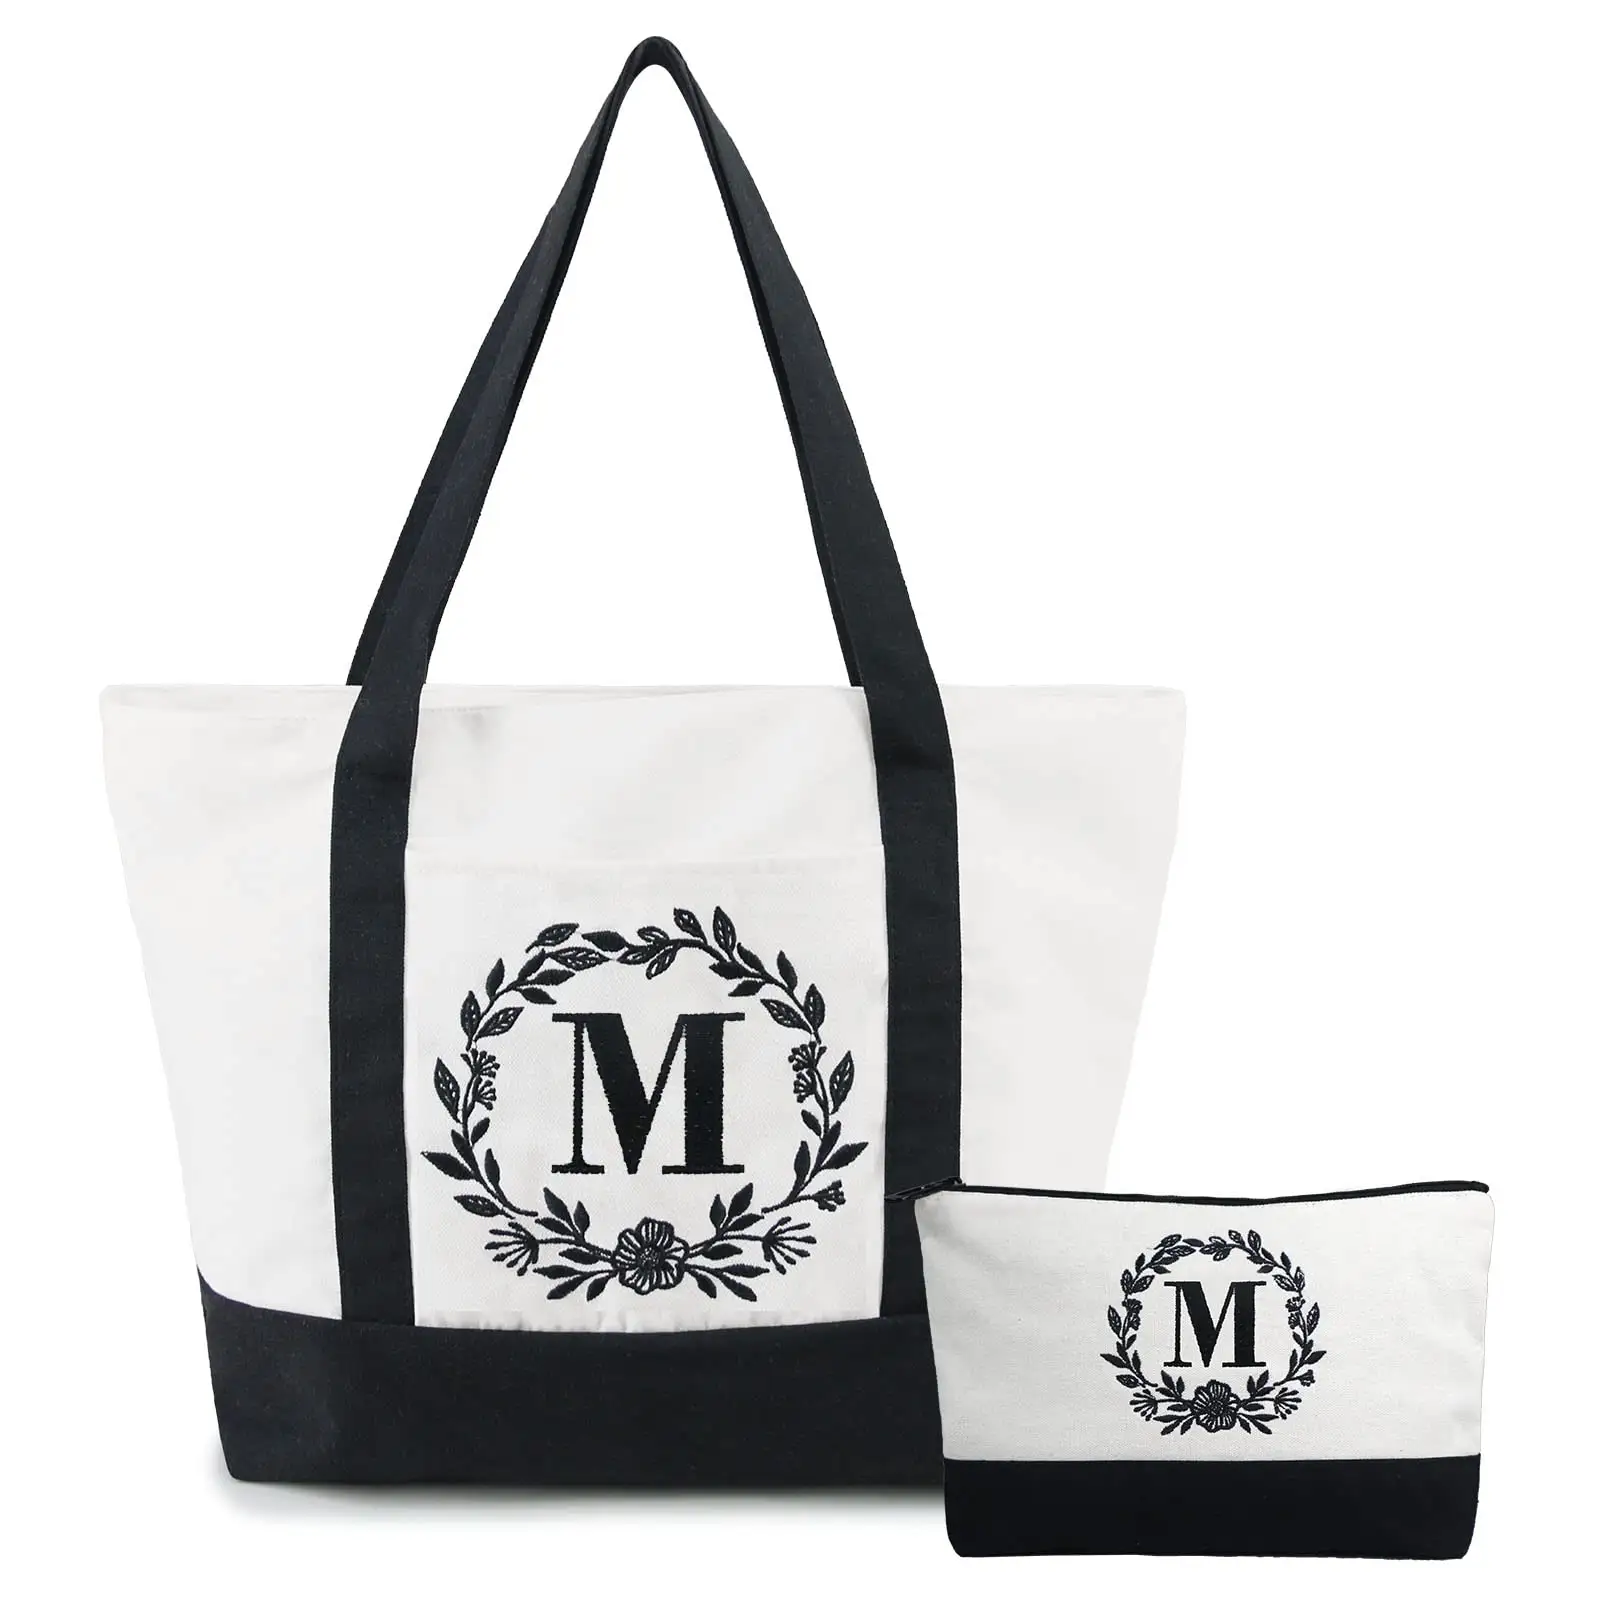 Heavy-Weight Large Personalized Tote Cotton Canvas Tote Bags Reusable Custom Tote Shopping Bags Cotton Canvas Bags